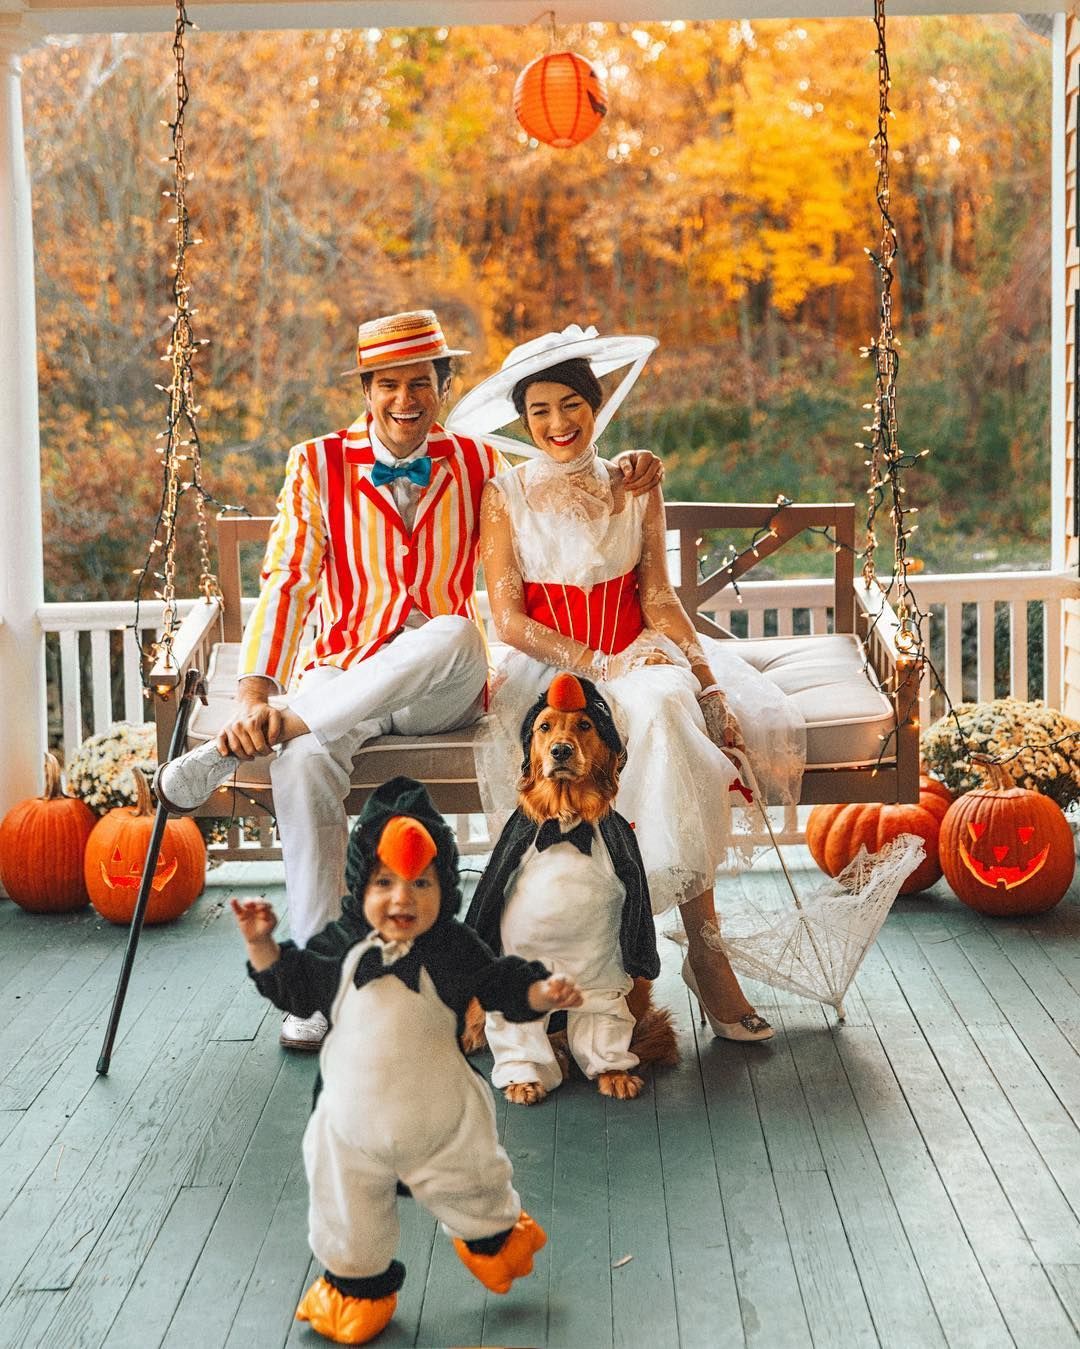 Sarah Patrick on Instagram: “It's a jolly holiday with you Bert ????? HAPPY HALLOWEEN EVERYONE!  @puffinandbennie @kjp” - Sarah Patrick on Instagram: “It's a jolly holiday with you Bert ????? HAPPY HALLOWEEN EVERYONE!  @puffinandbennie @kjp” -   16 diy Halloween Costumes for families ideas